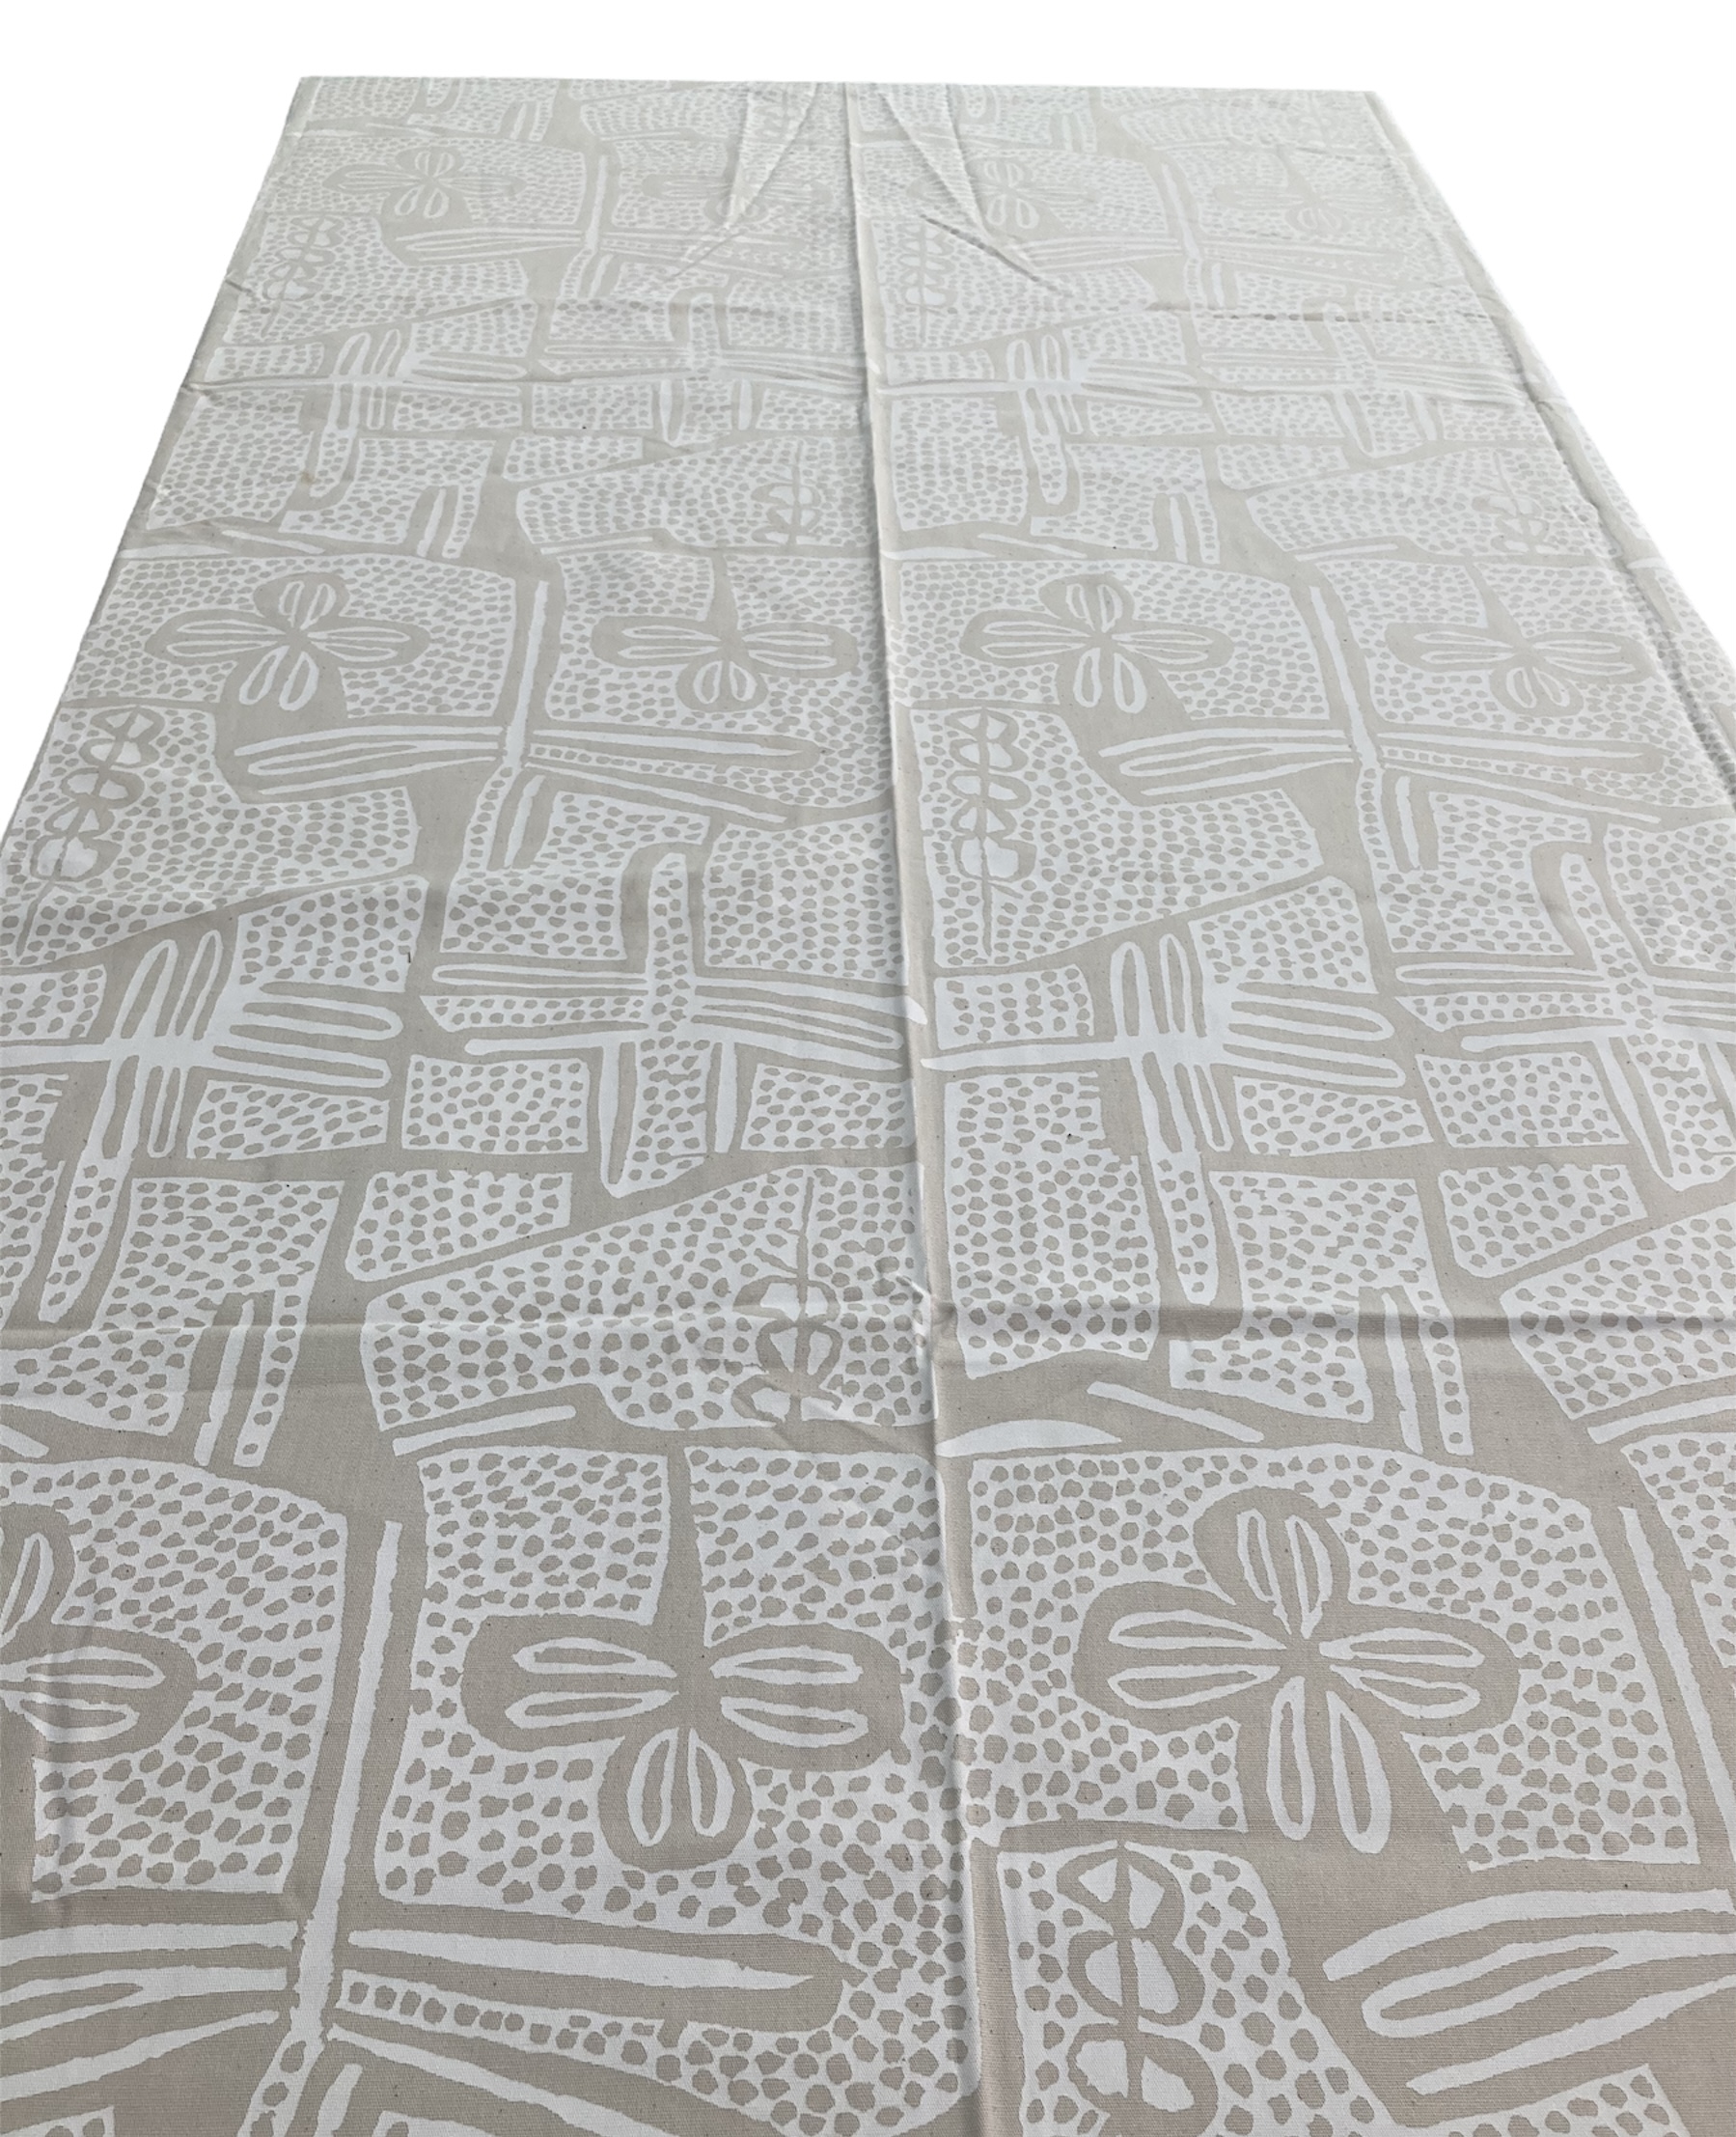 100% cotton Tablecloth approx. 79" x 57" from Namibia - # b14t